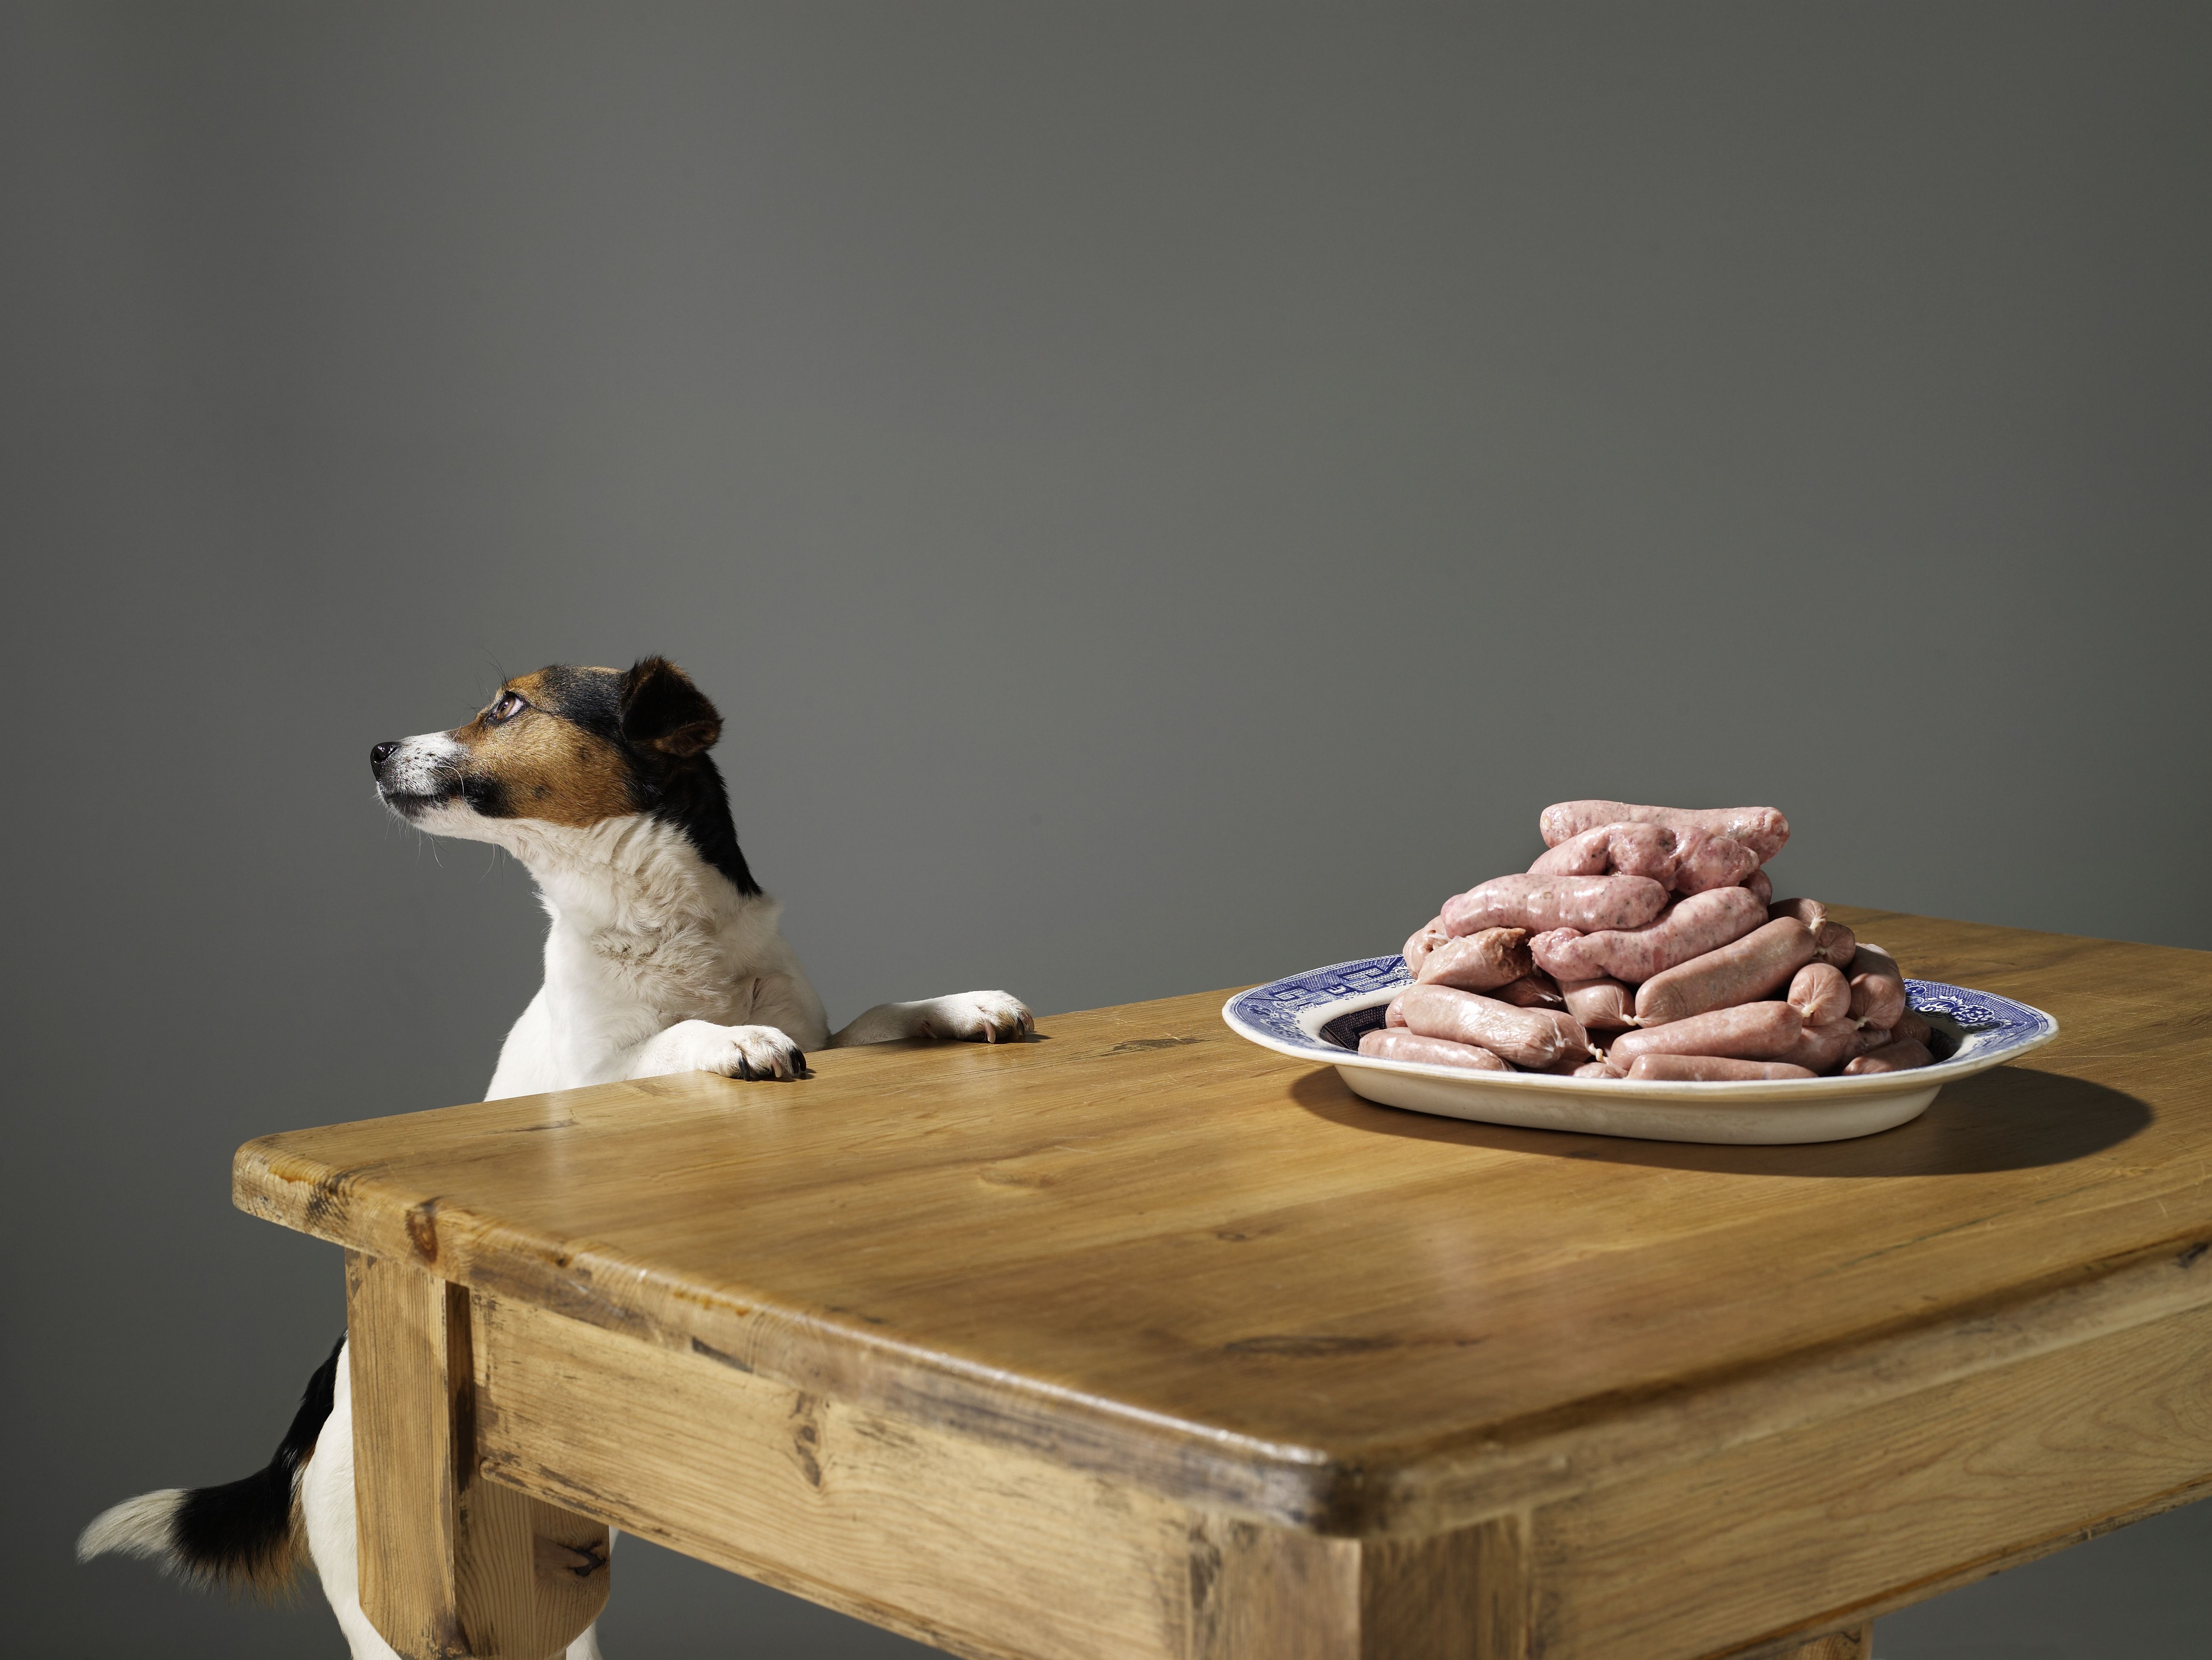 Jack Russell with paws on the table that has a pile of sausages on it.